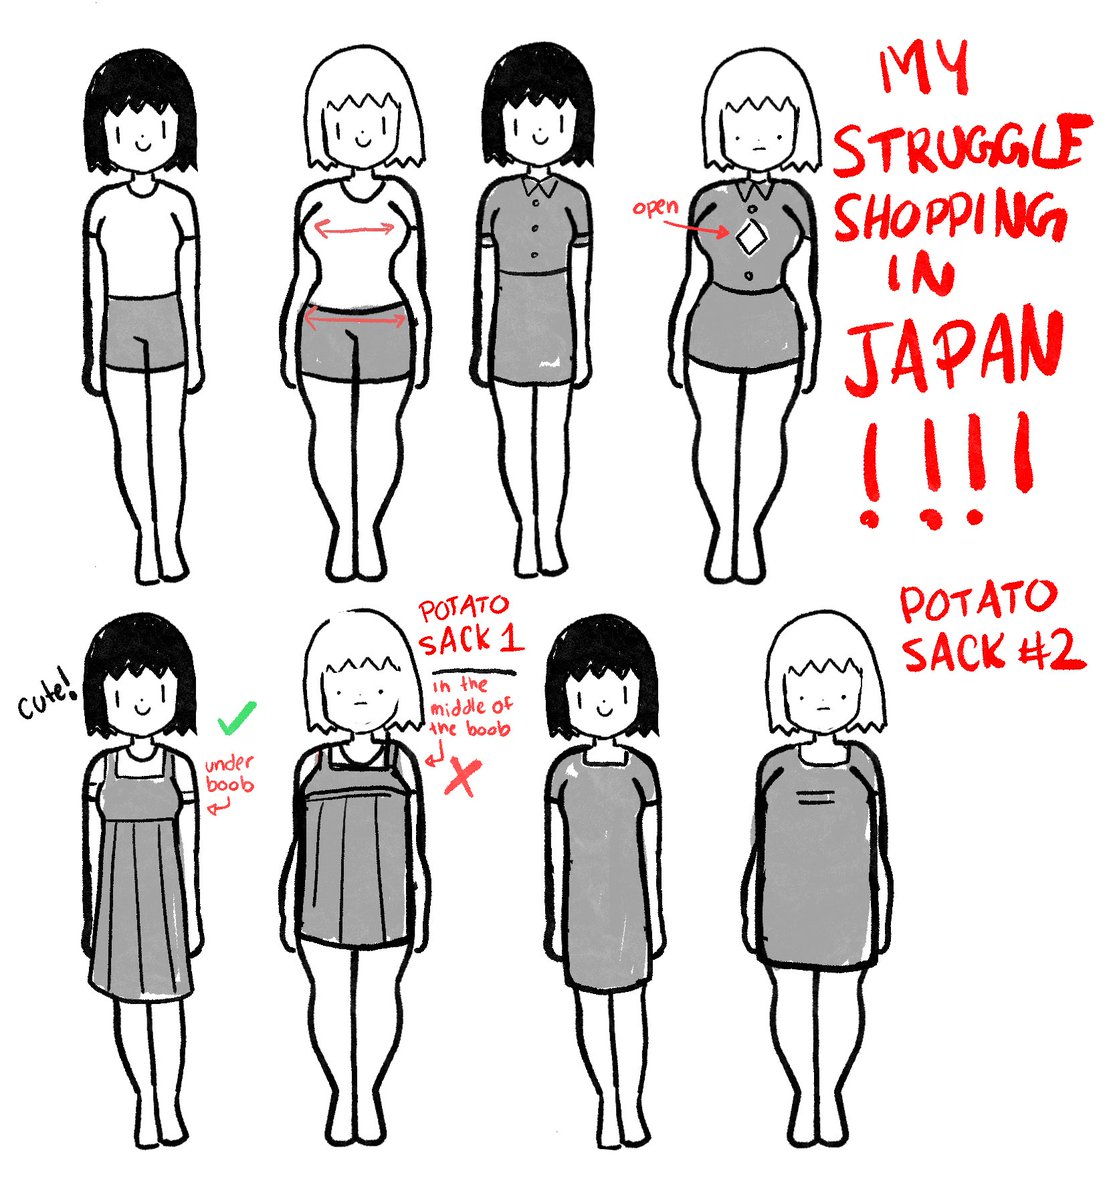 Shopping in Japan is a struggle when you don't have the ideal body-type for Japanese fashion